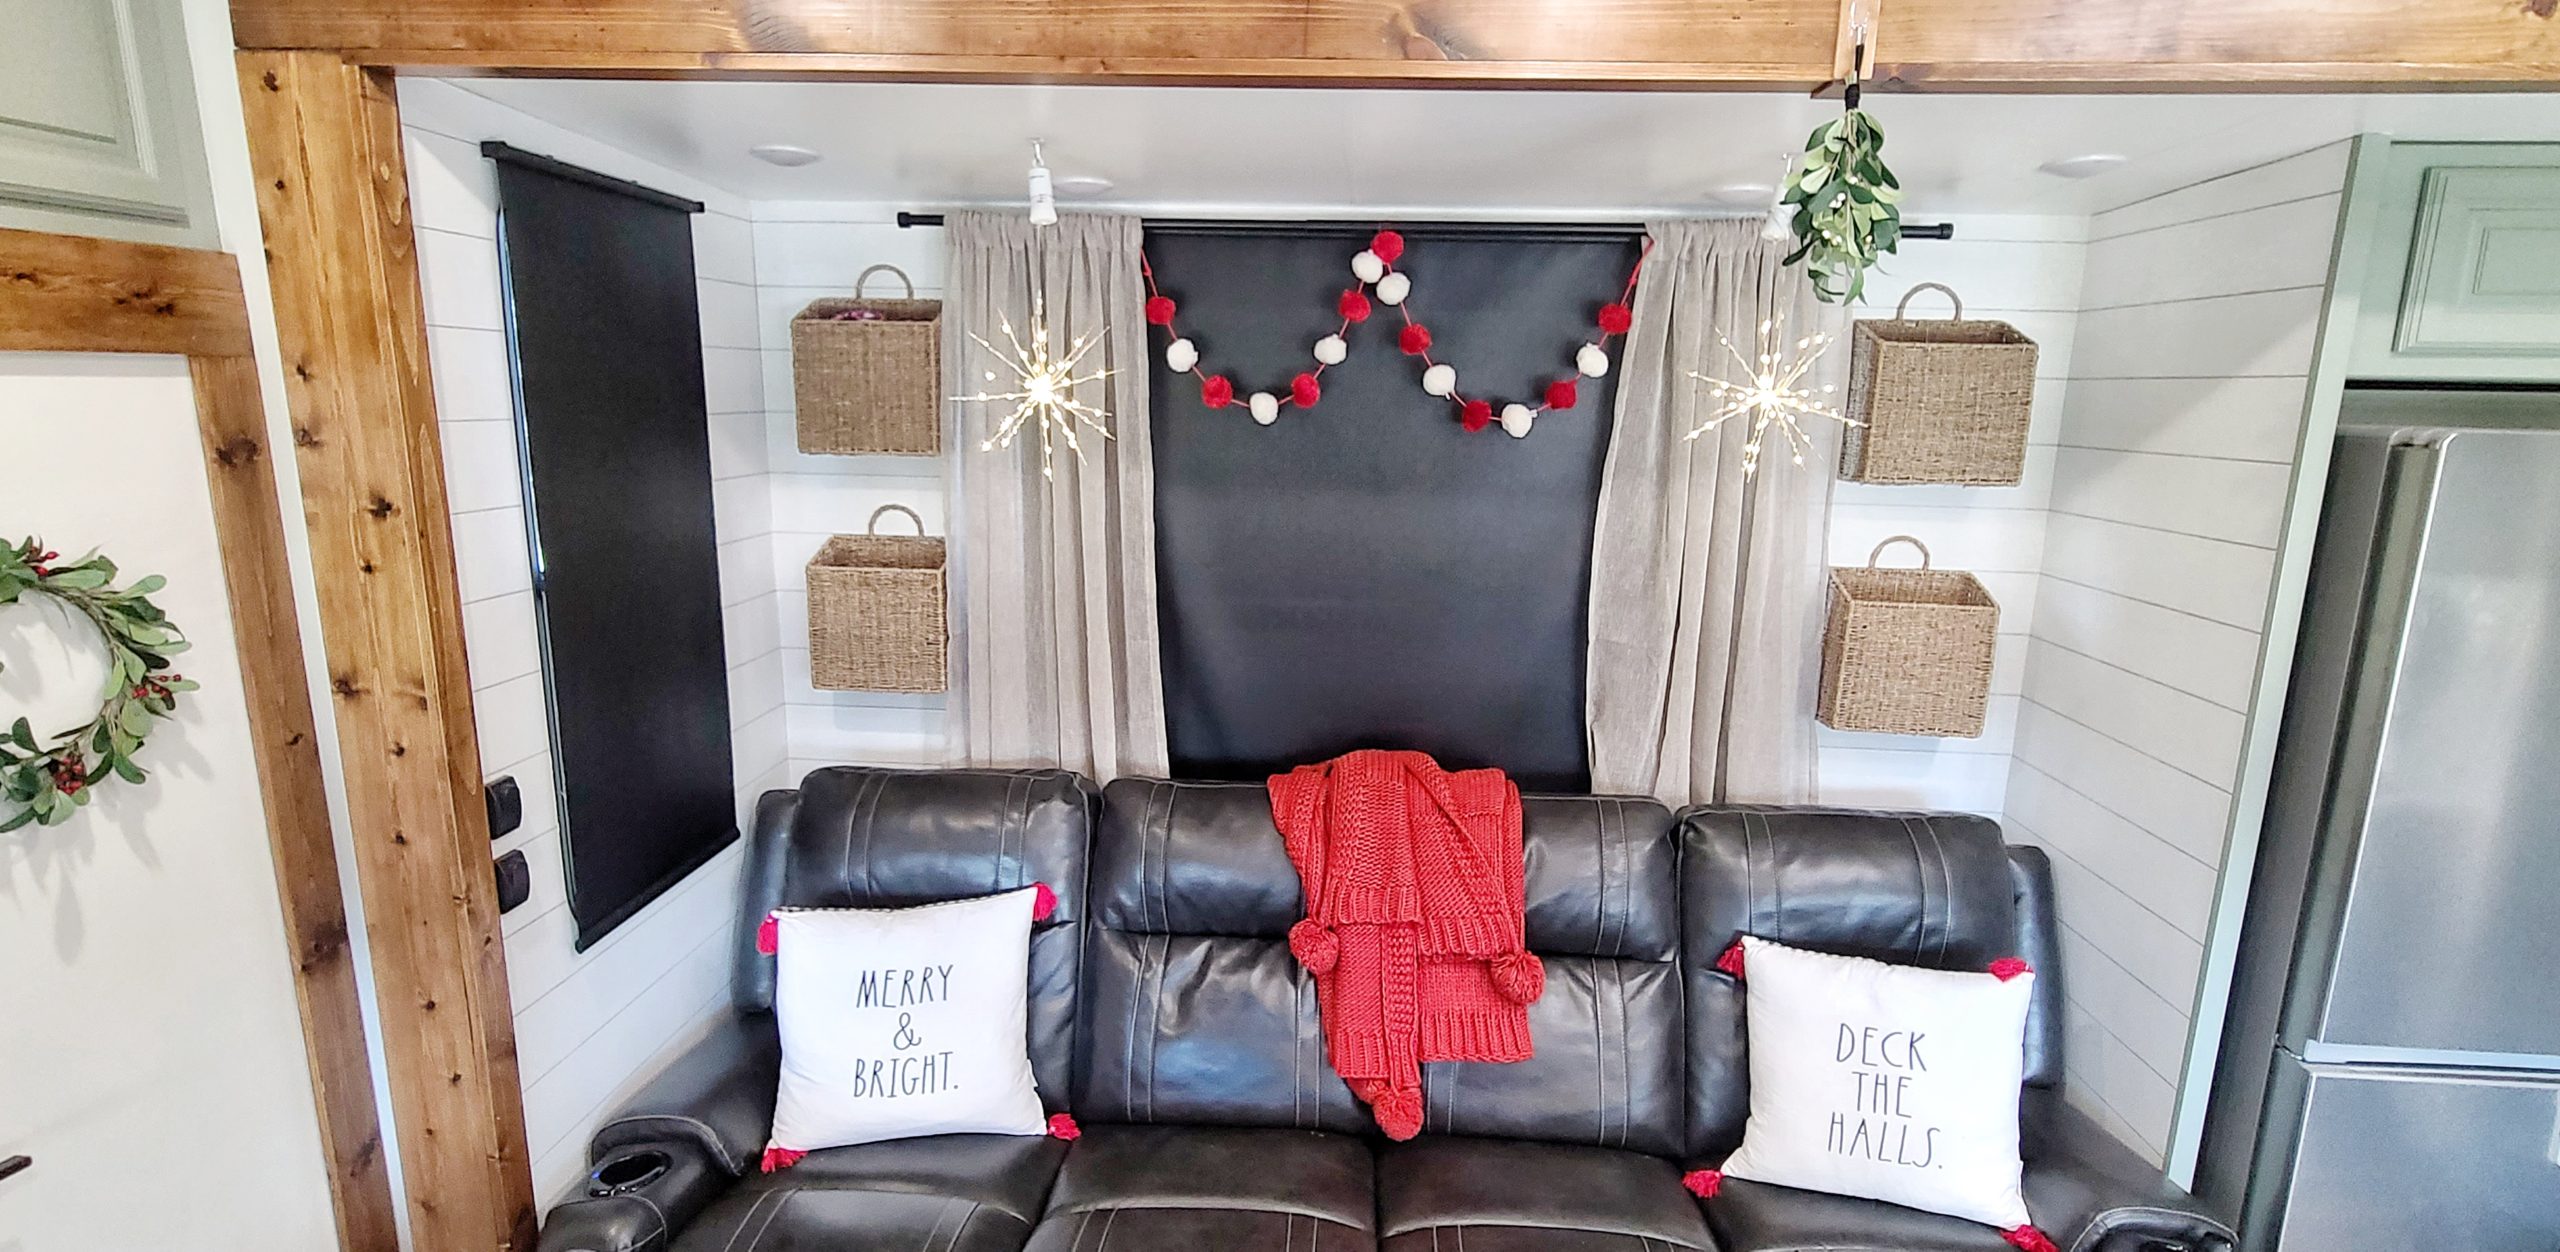 8 Easy Ways to Decorate your RV (or tiny space) for the Holidays ...